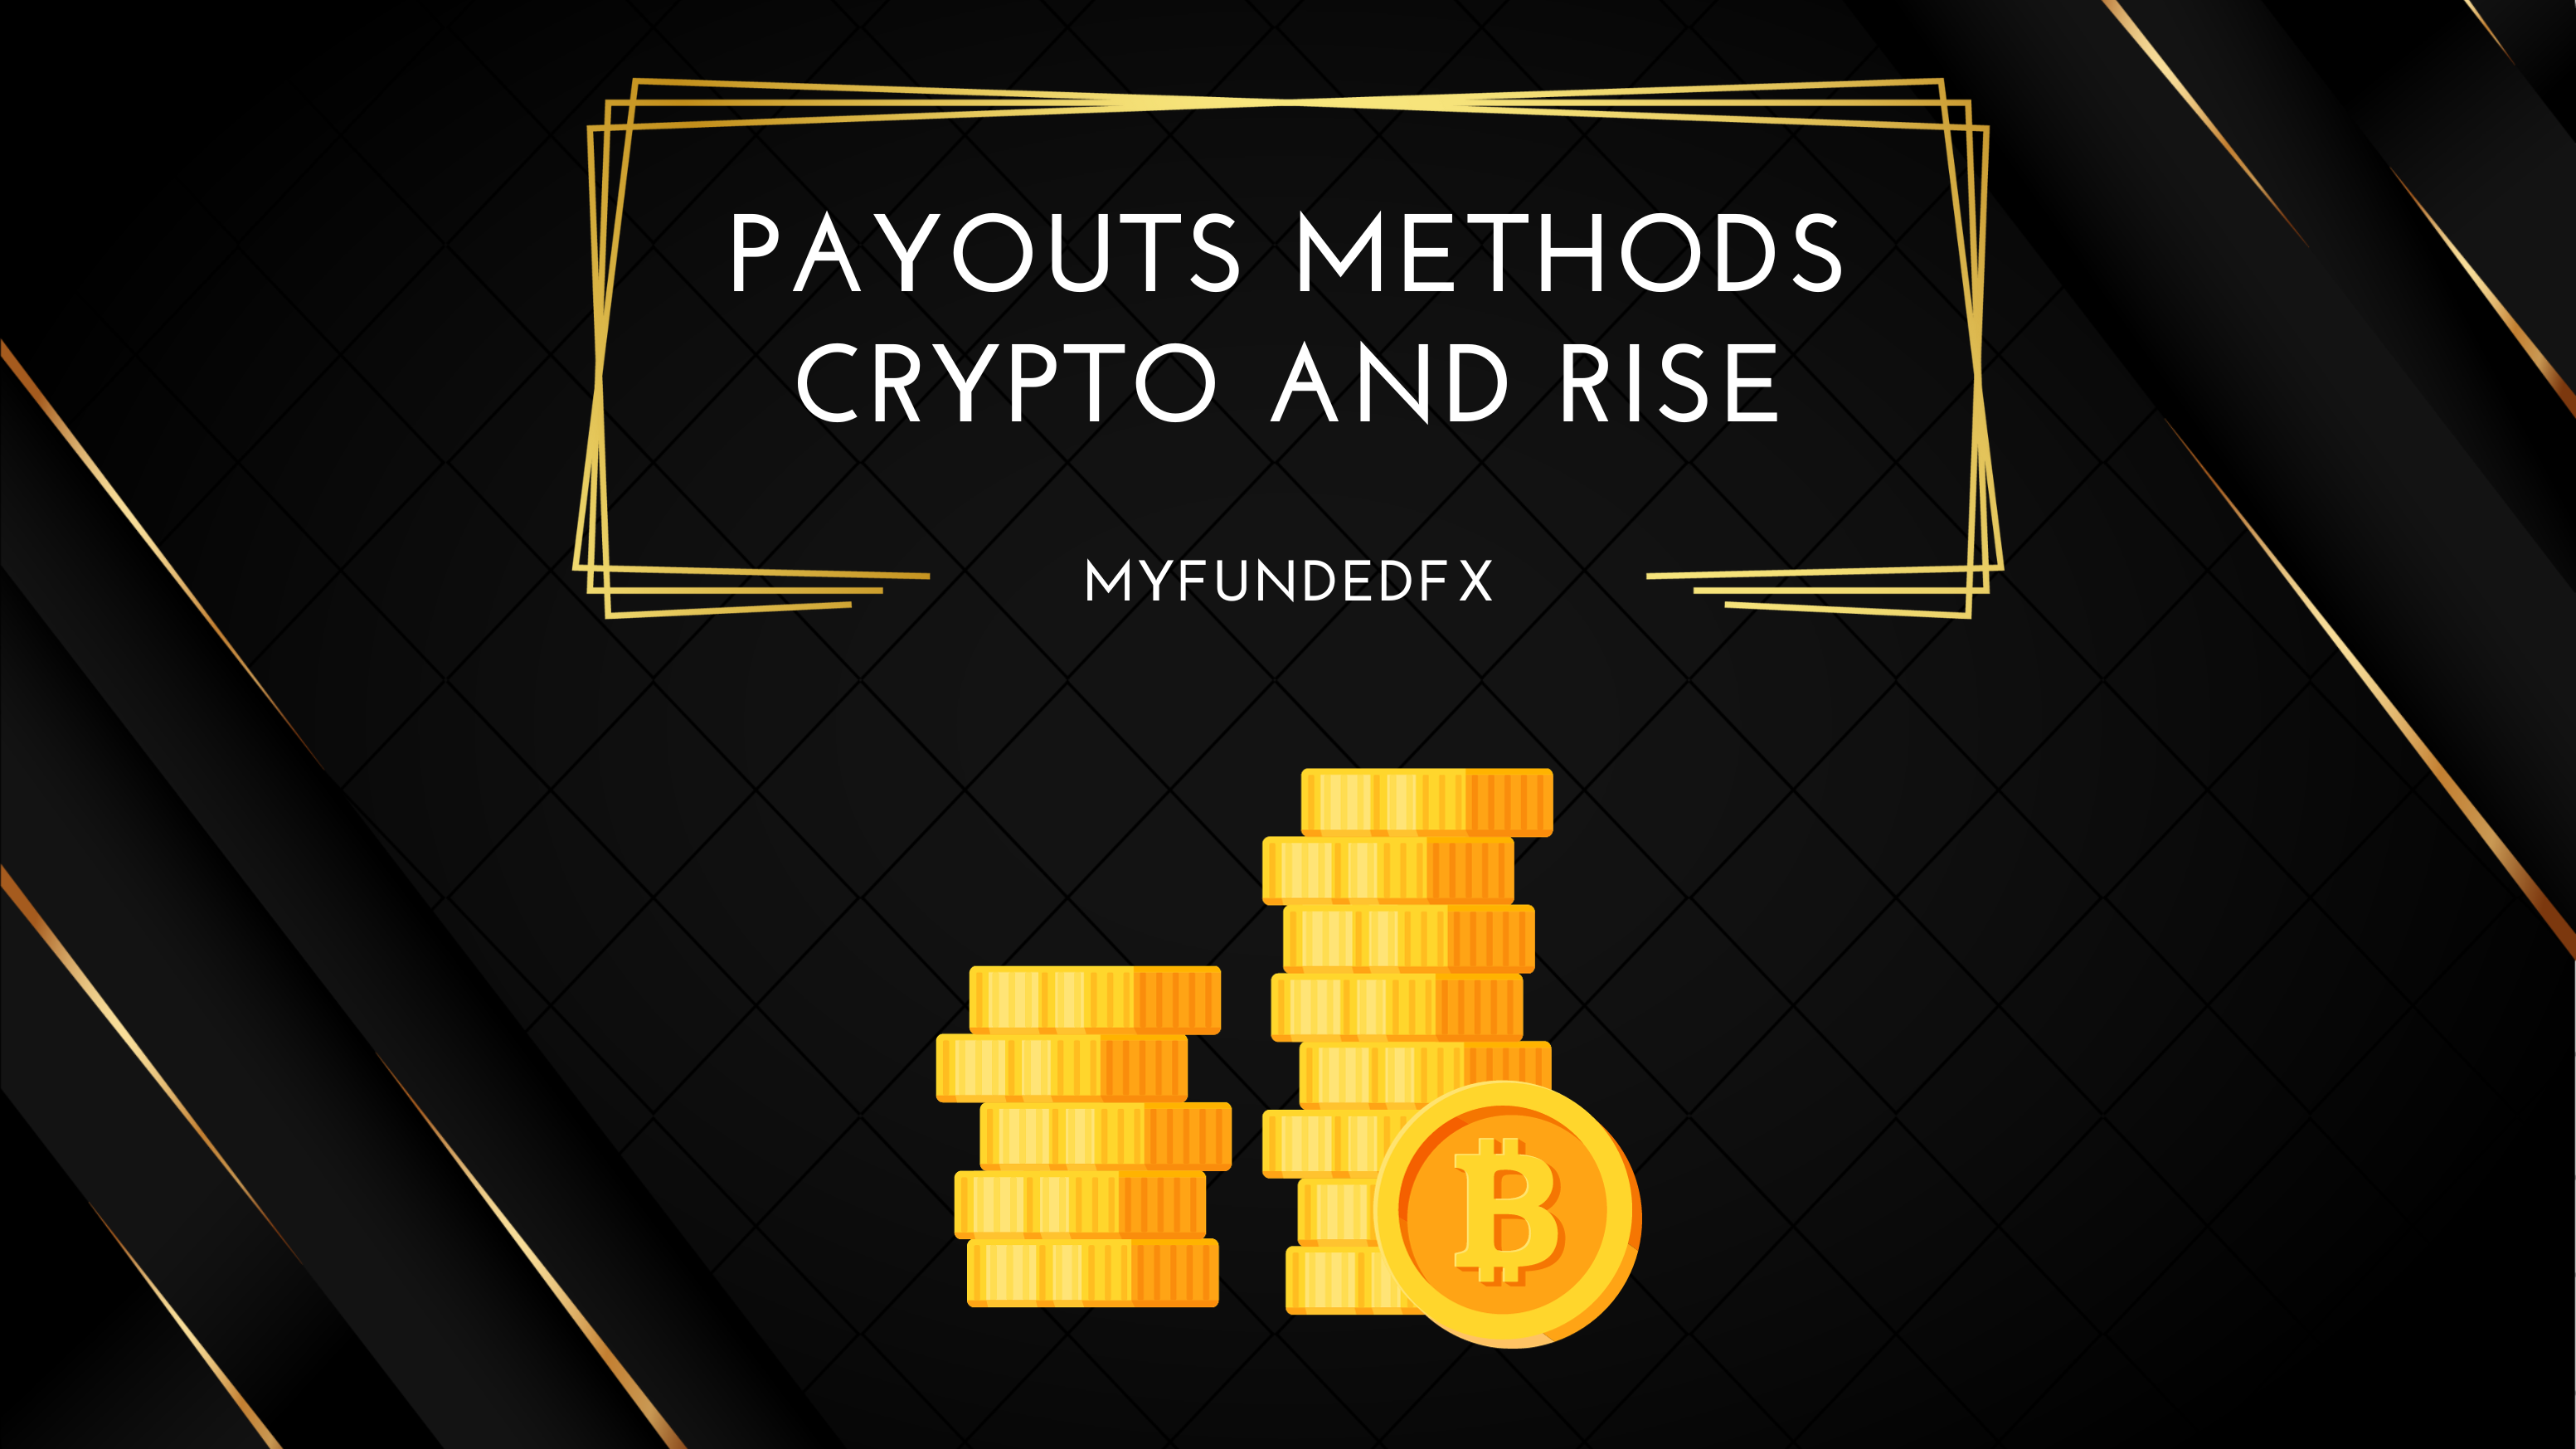 MyFundedFx Payout Methods Crypto and Rise